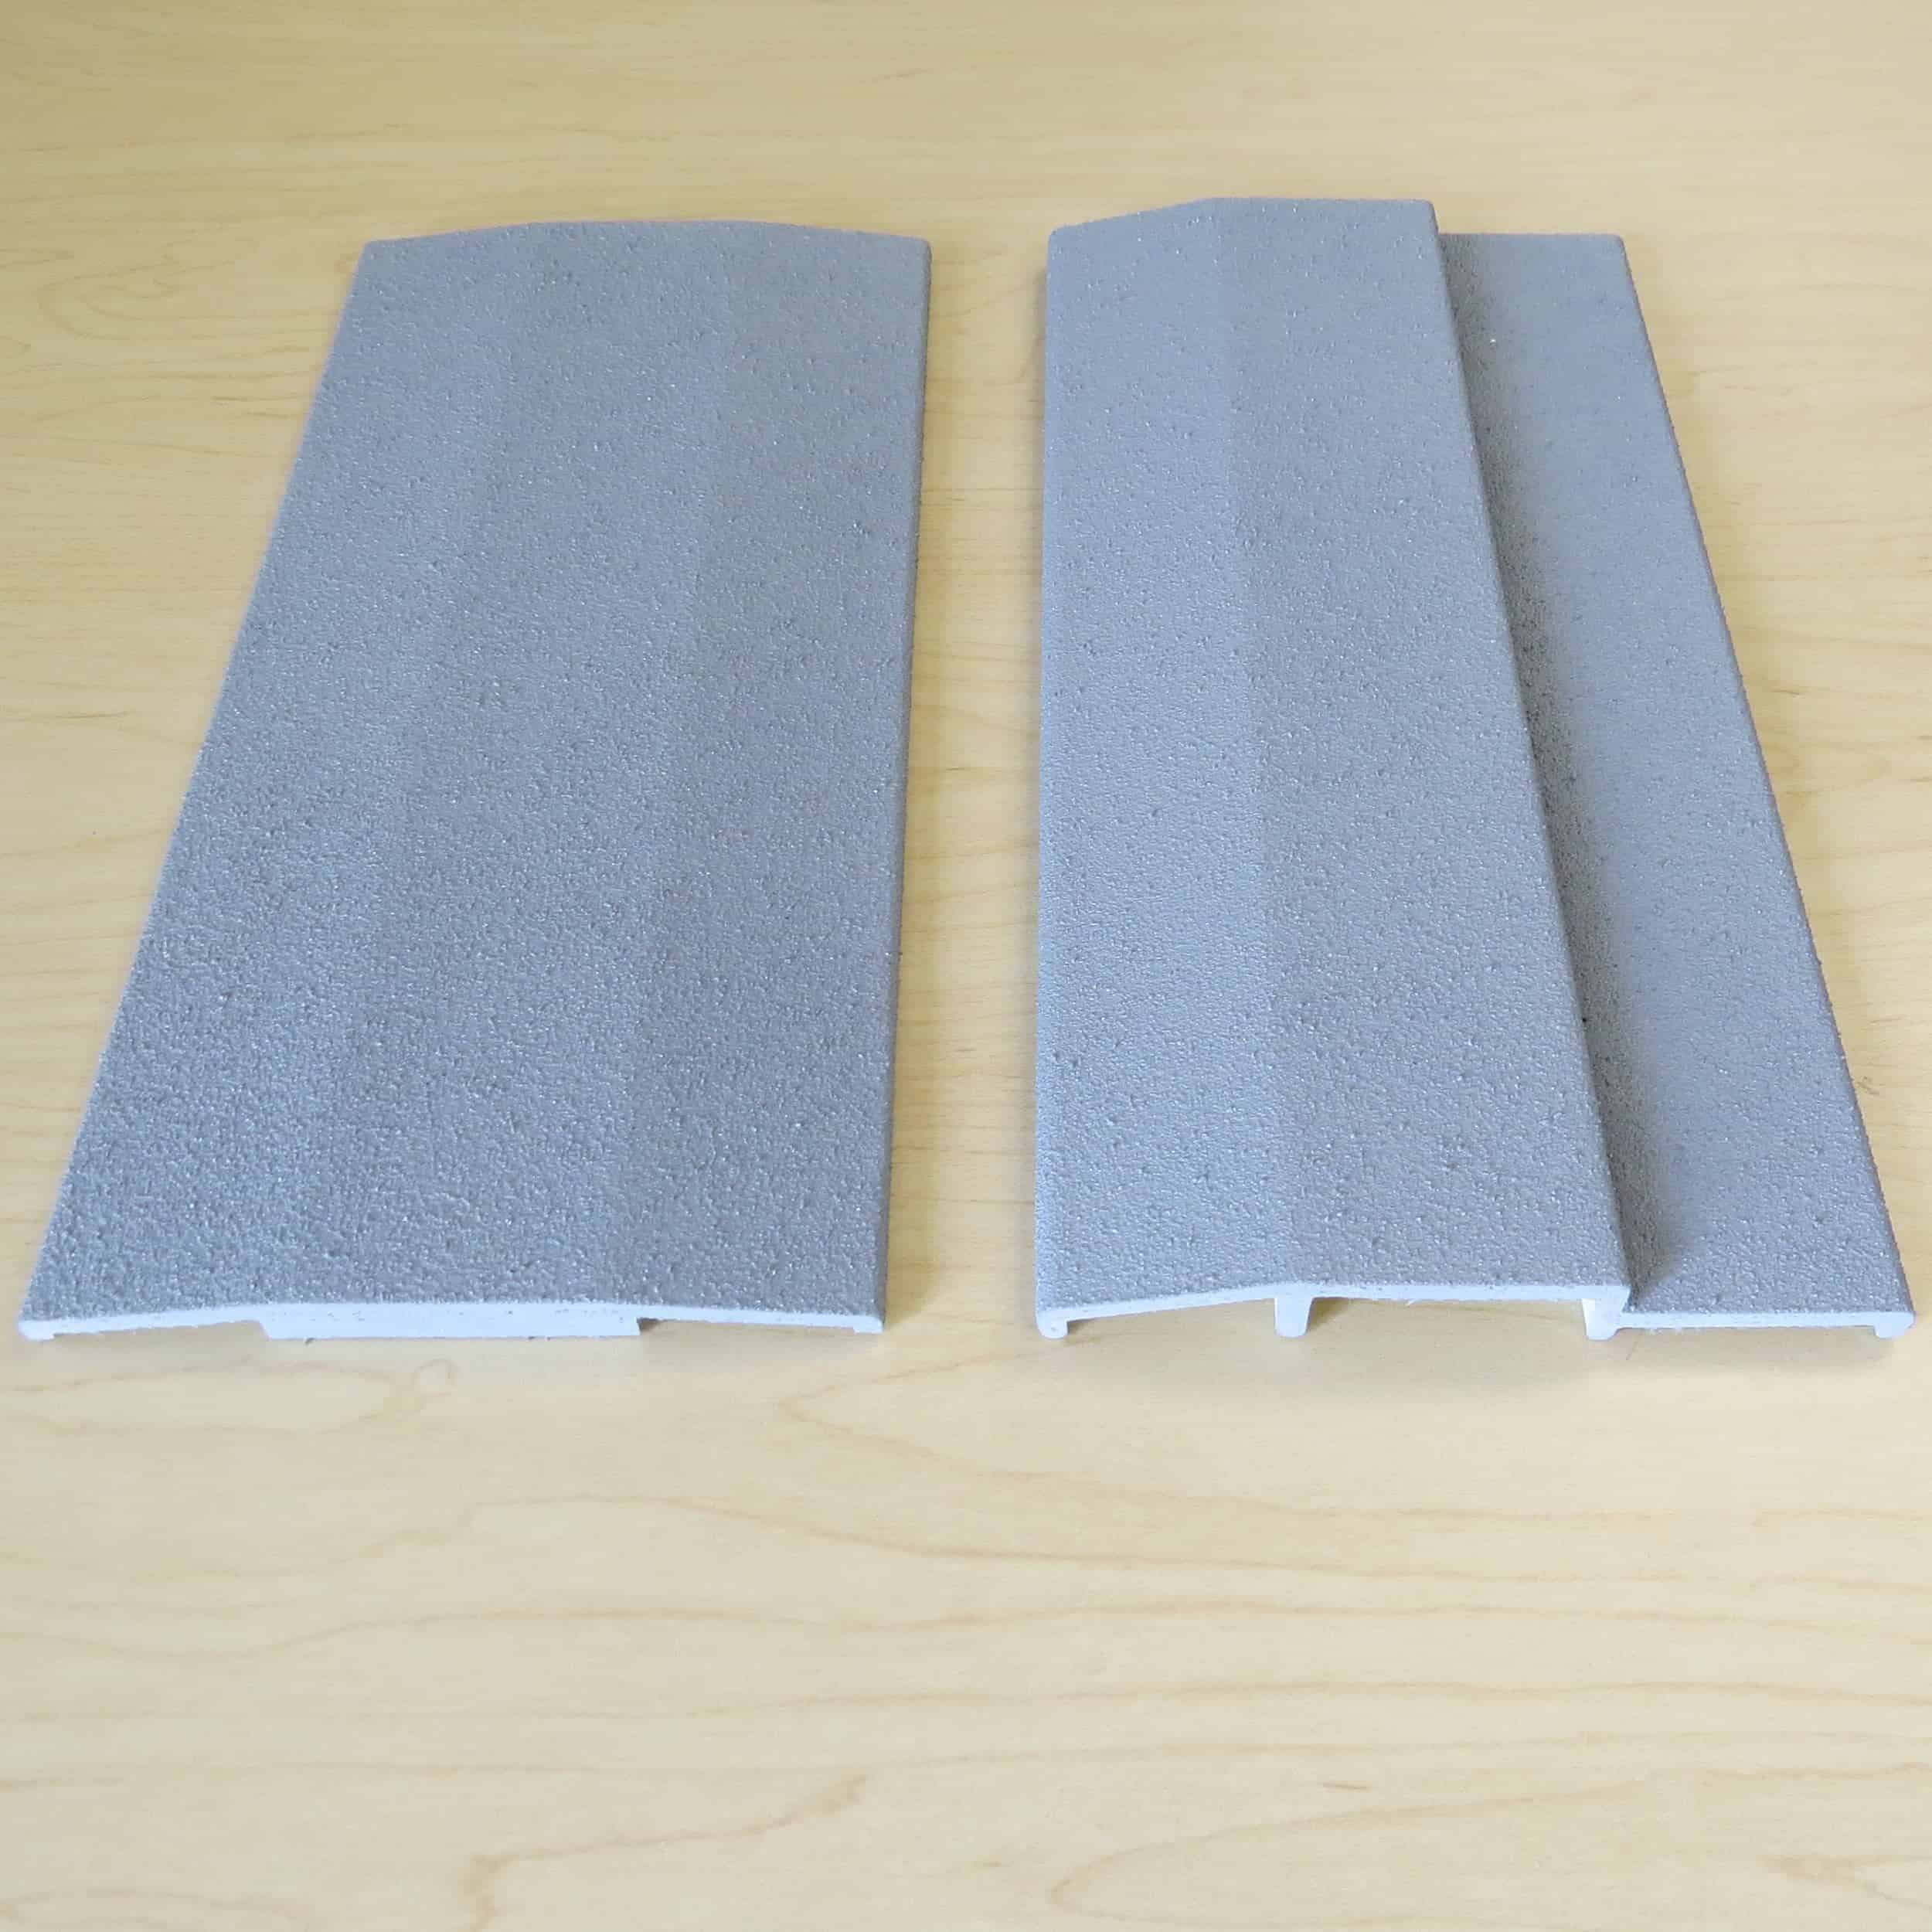 Two pieces of gray plastic on a wooden table.